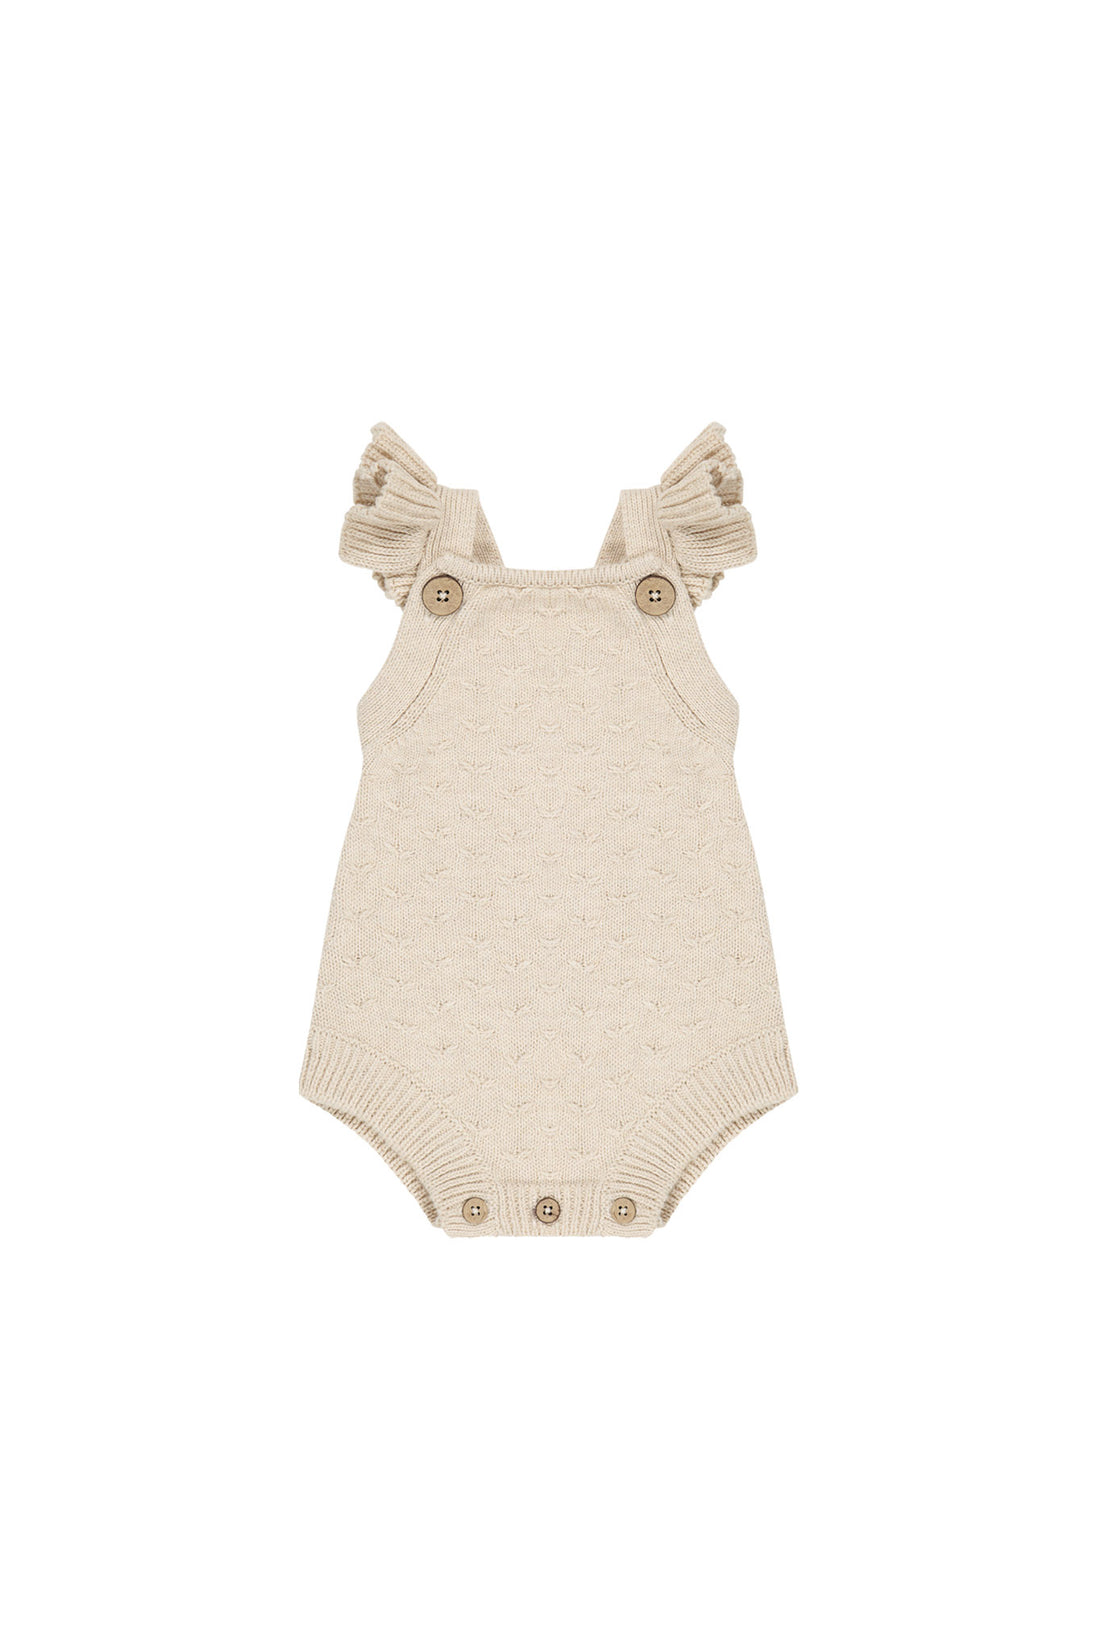 Mia Knitted Romper - Oatmeal Marle Childrens Romper from Jamie Kay NZ